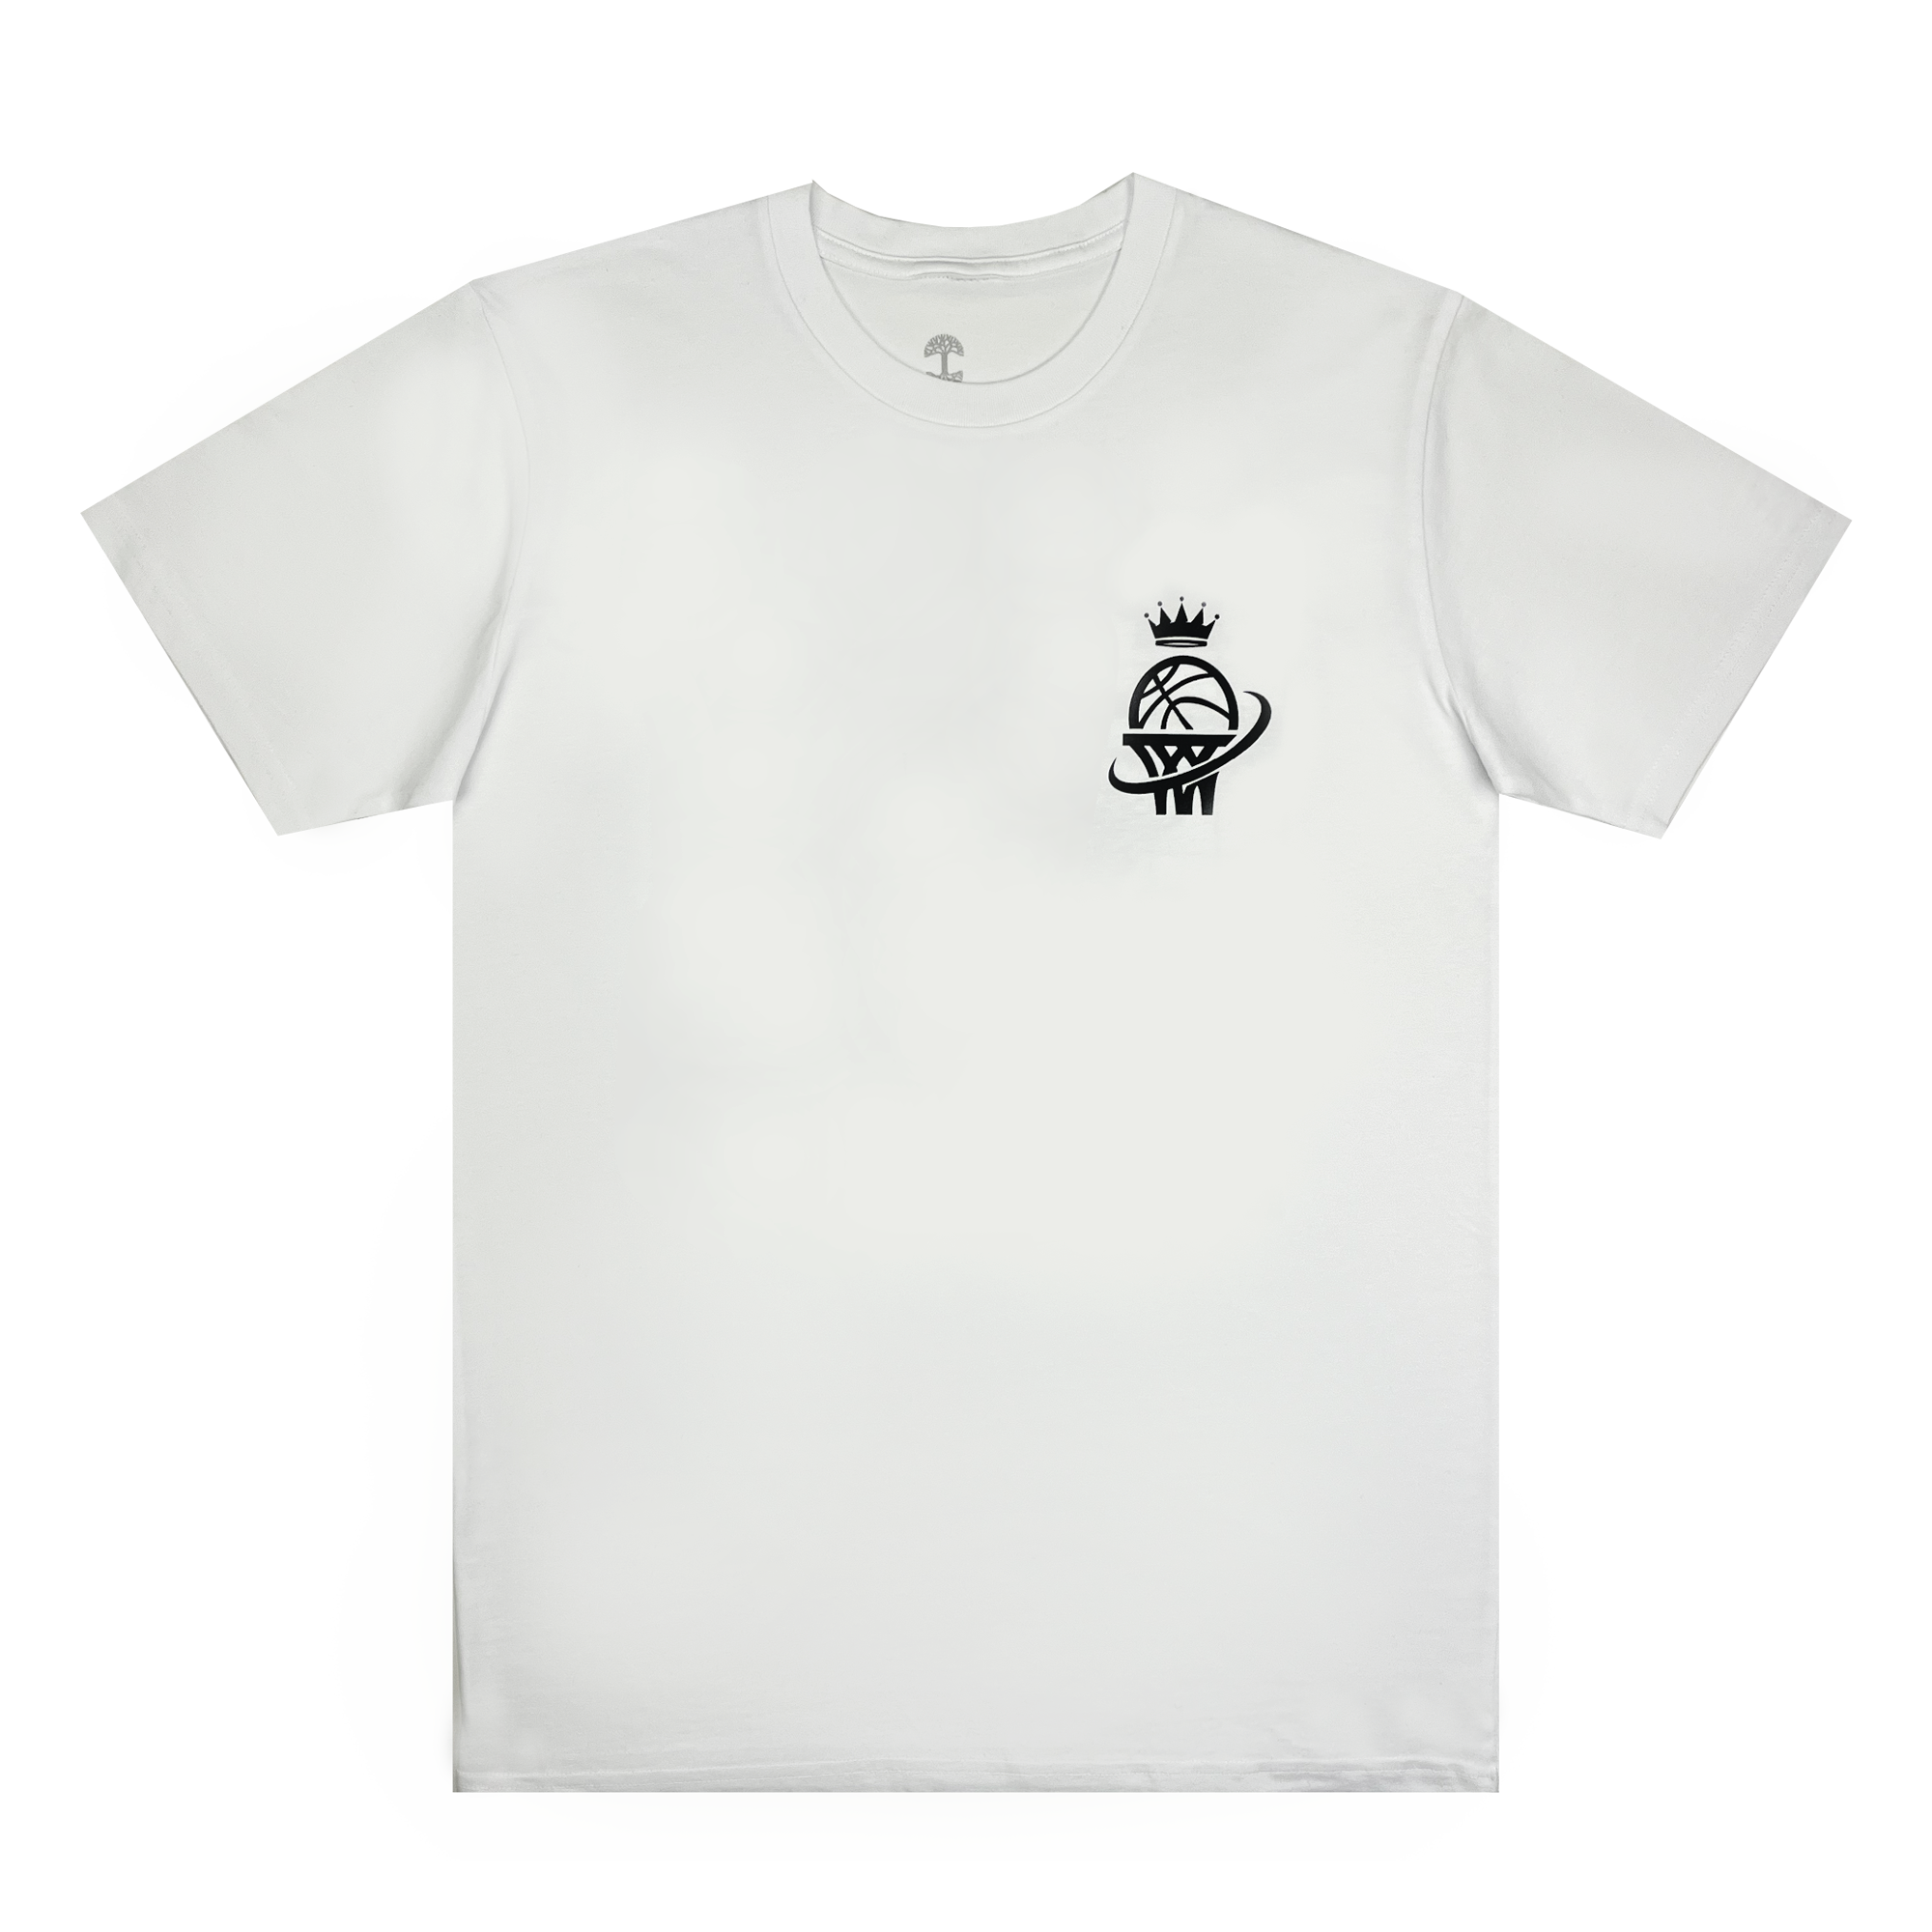 Front view of WPBA white t-shirt with WPBA logo on left chest in black.